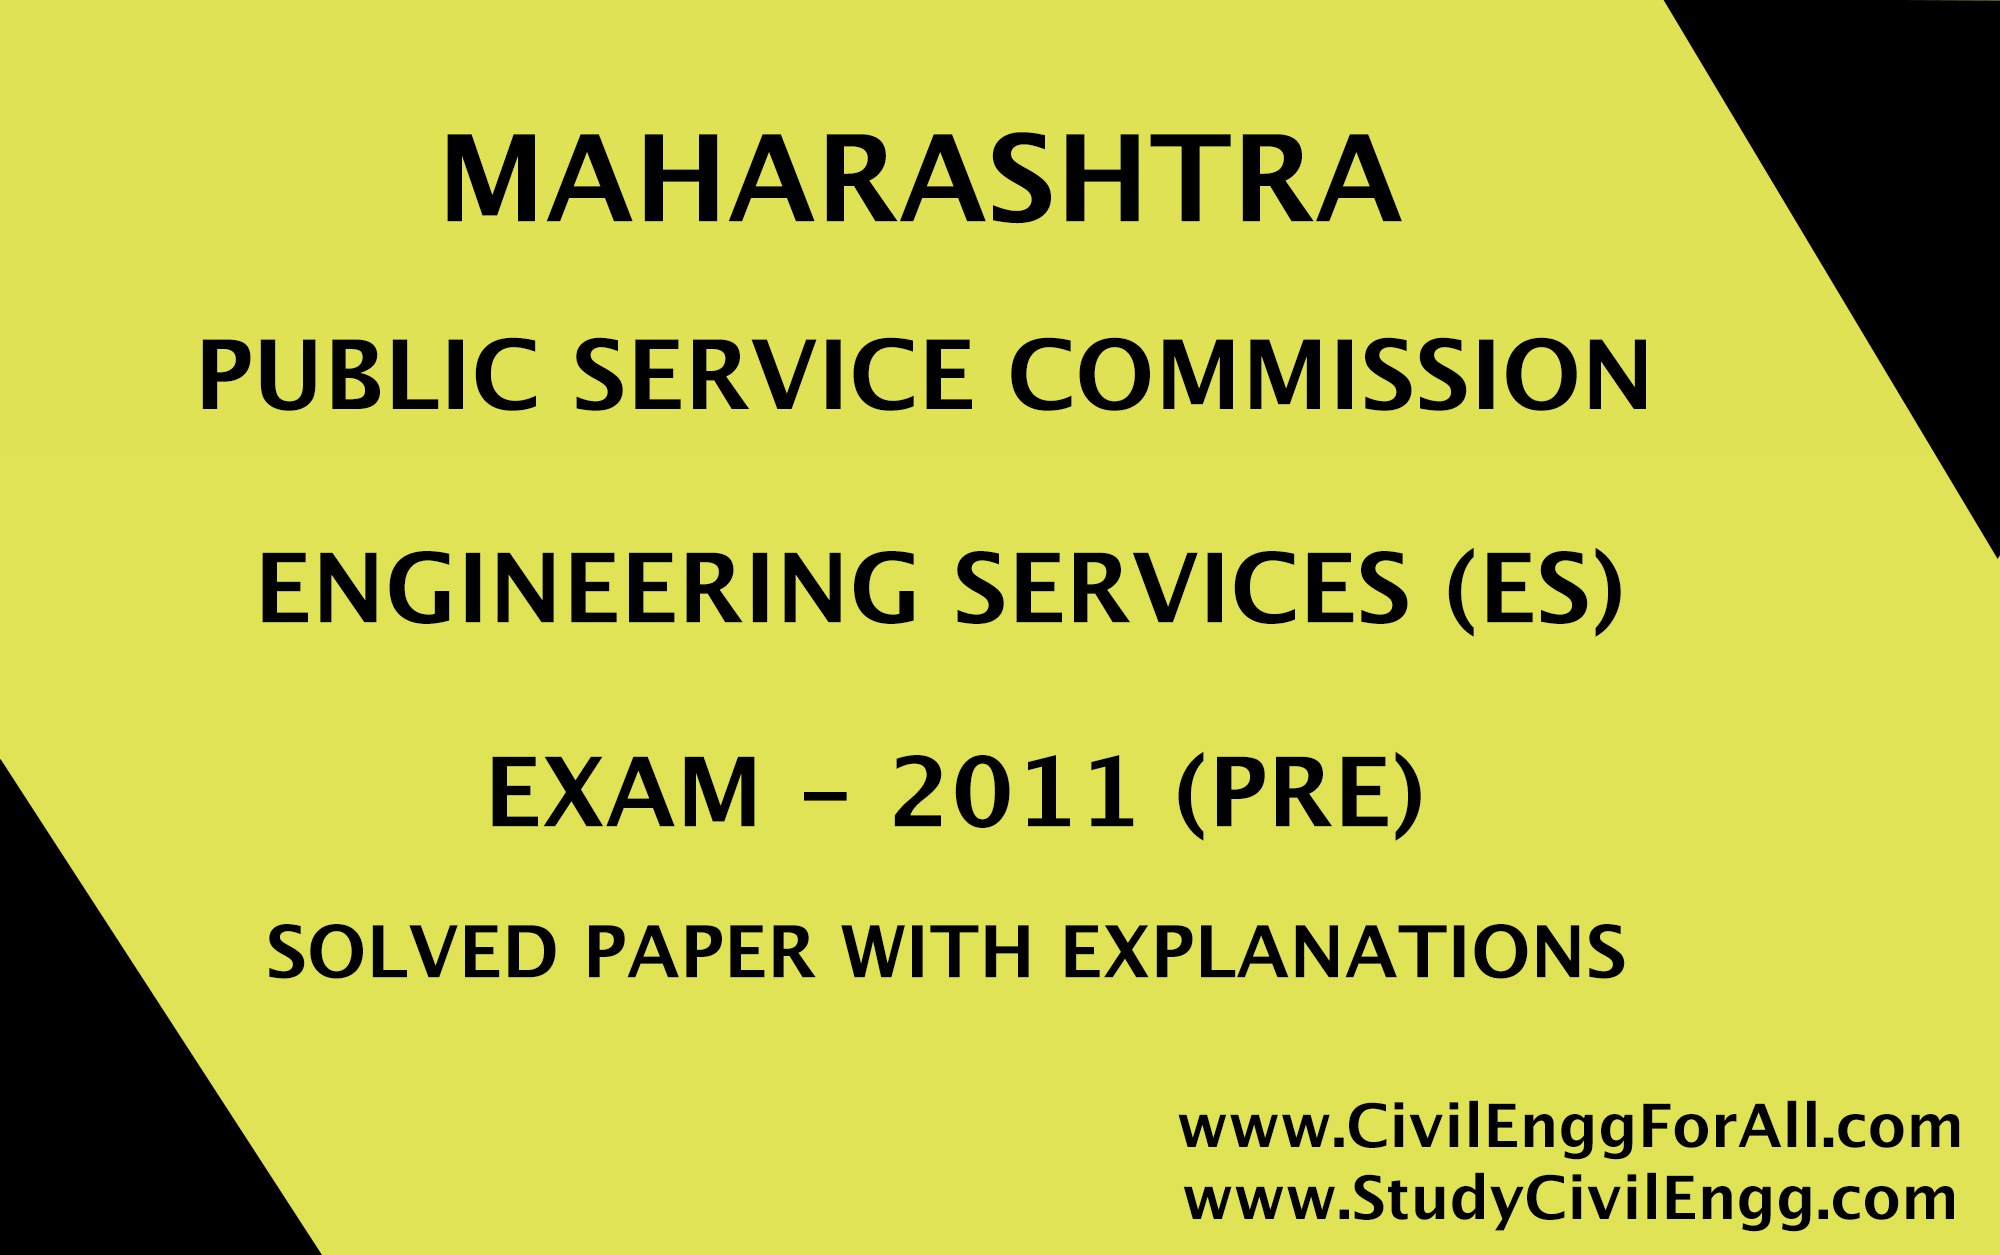 MAHARASHTRA PUBLIC SERVICE COMMISSION ENGINEERING SERVICES EXAM 2011 CIVIL ENGINEERING SOLVED PAPER FREE DOWNLOAD PDF